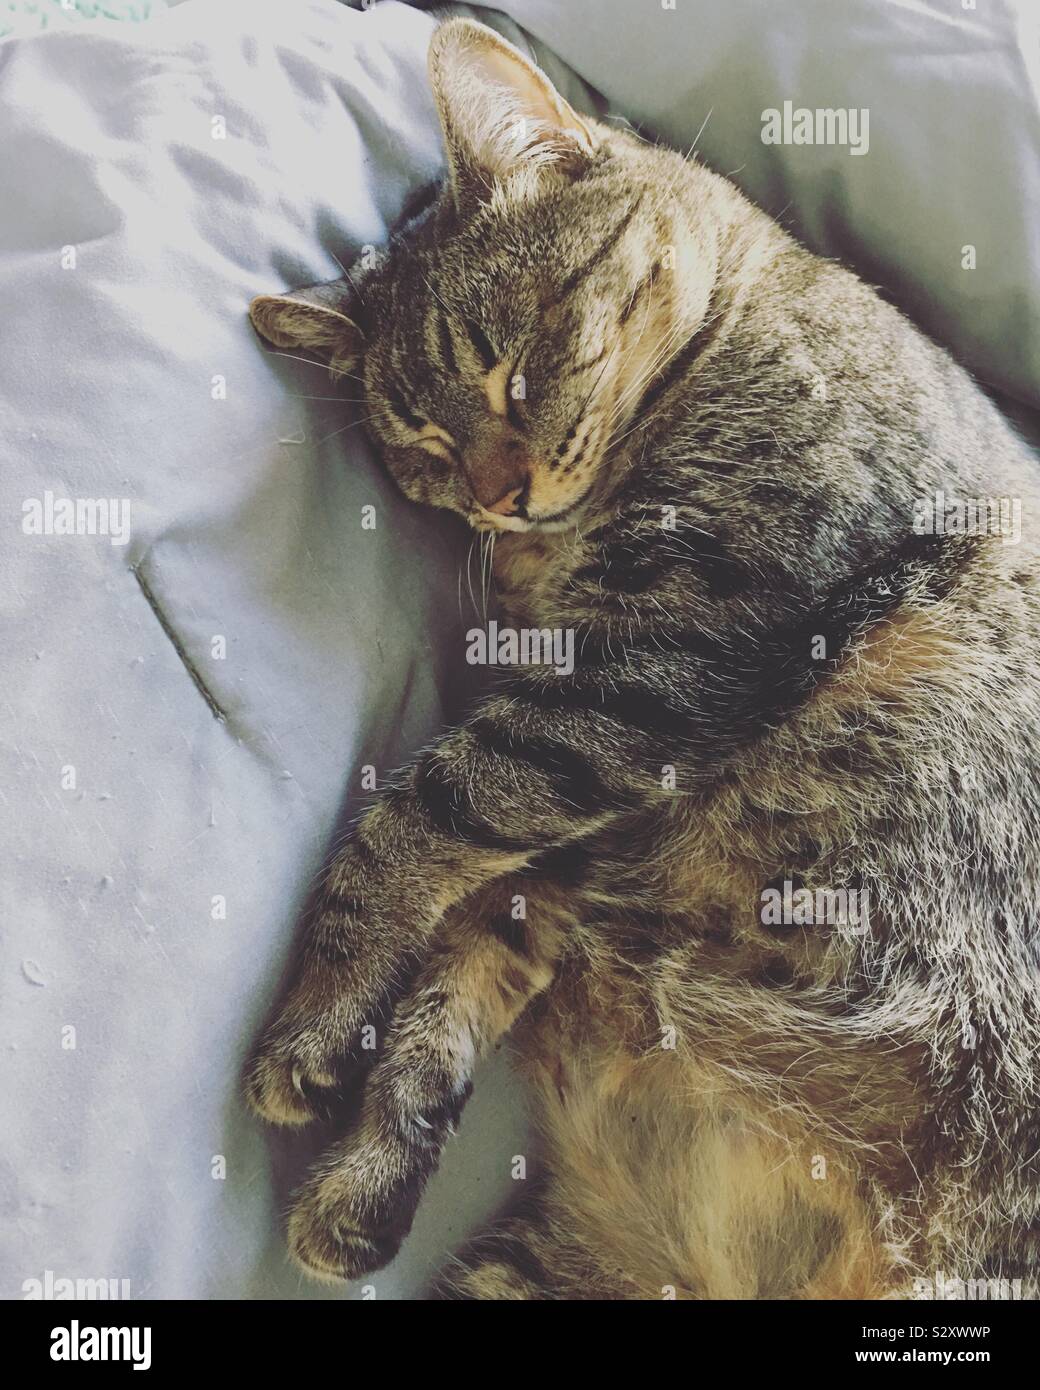 A tabby cat sleeping on a bed. Stock Photo